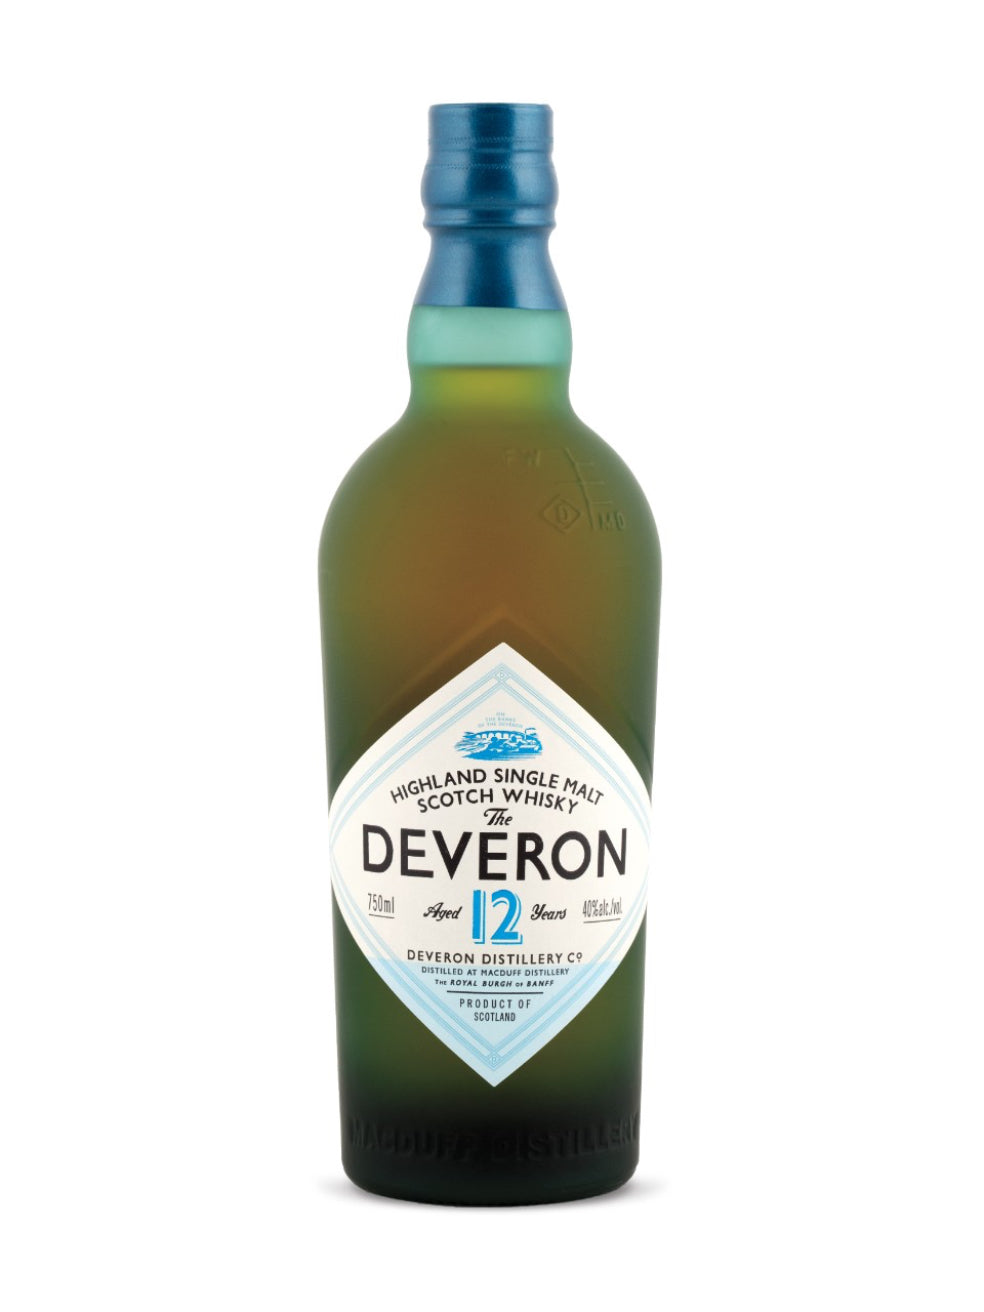 The Deveron 12-Year Old Highland Single Malt Scotch Whisky is light and sweet with notes of citrus fruit and spice.